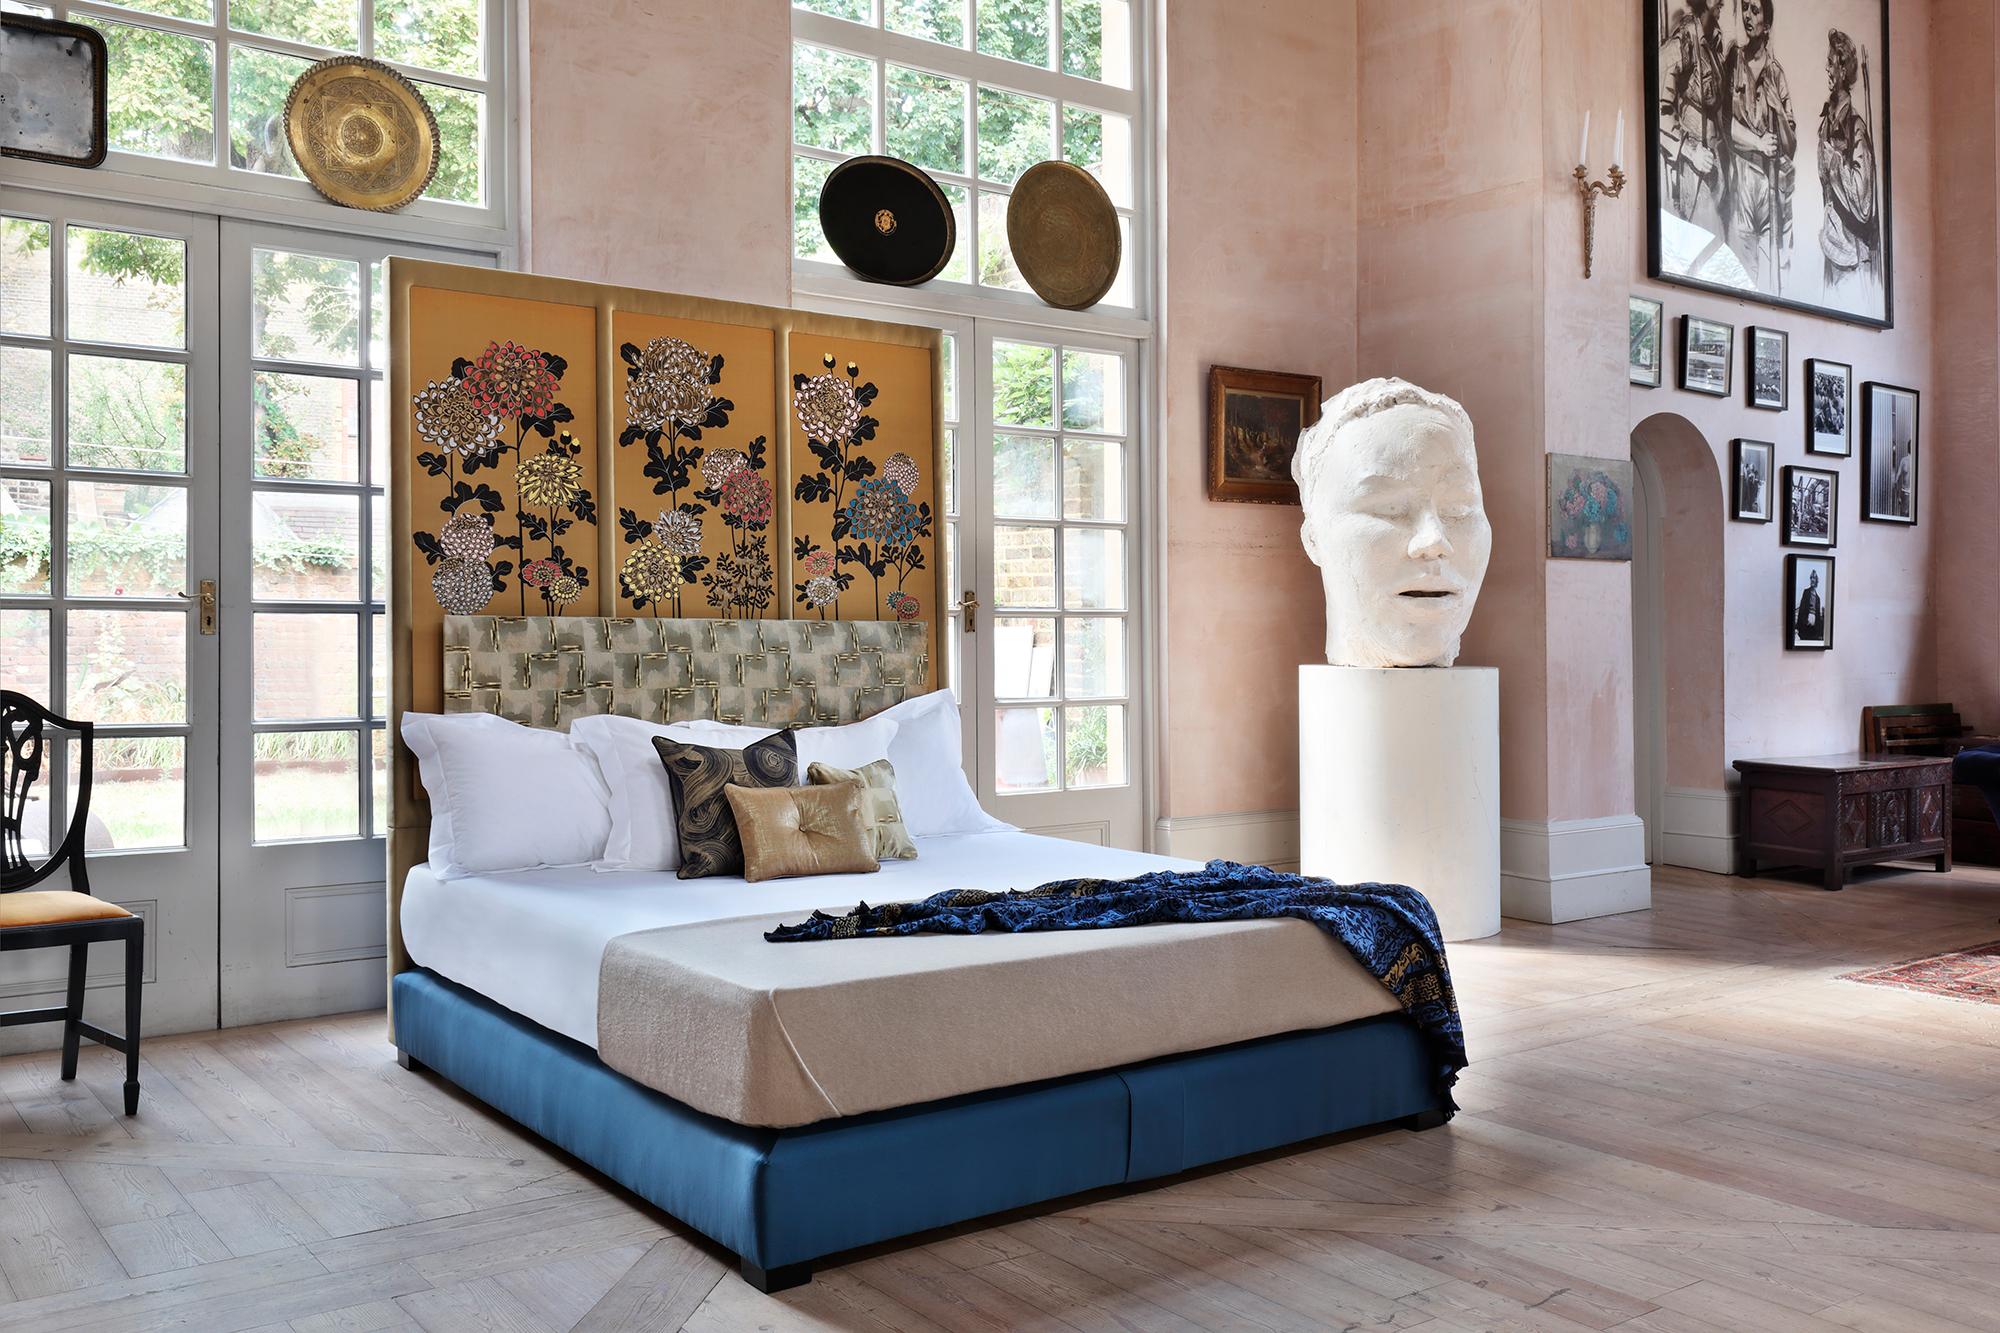 Established in London, founding partners Lizzie Deshayes and Tim Butcher created Fromental with a mission to make the world's finest wallpapers and fabrics. Showcasing their luxurious decorative textiles, the beautifully striking Savoir Kiku